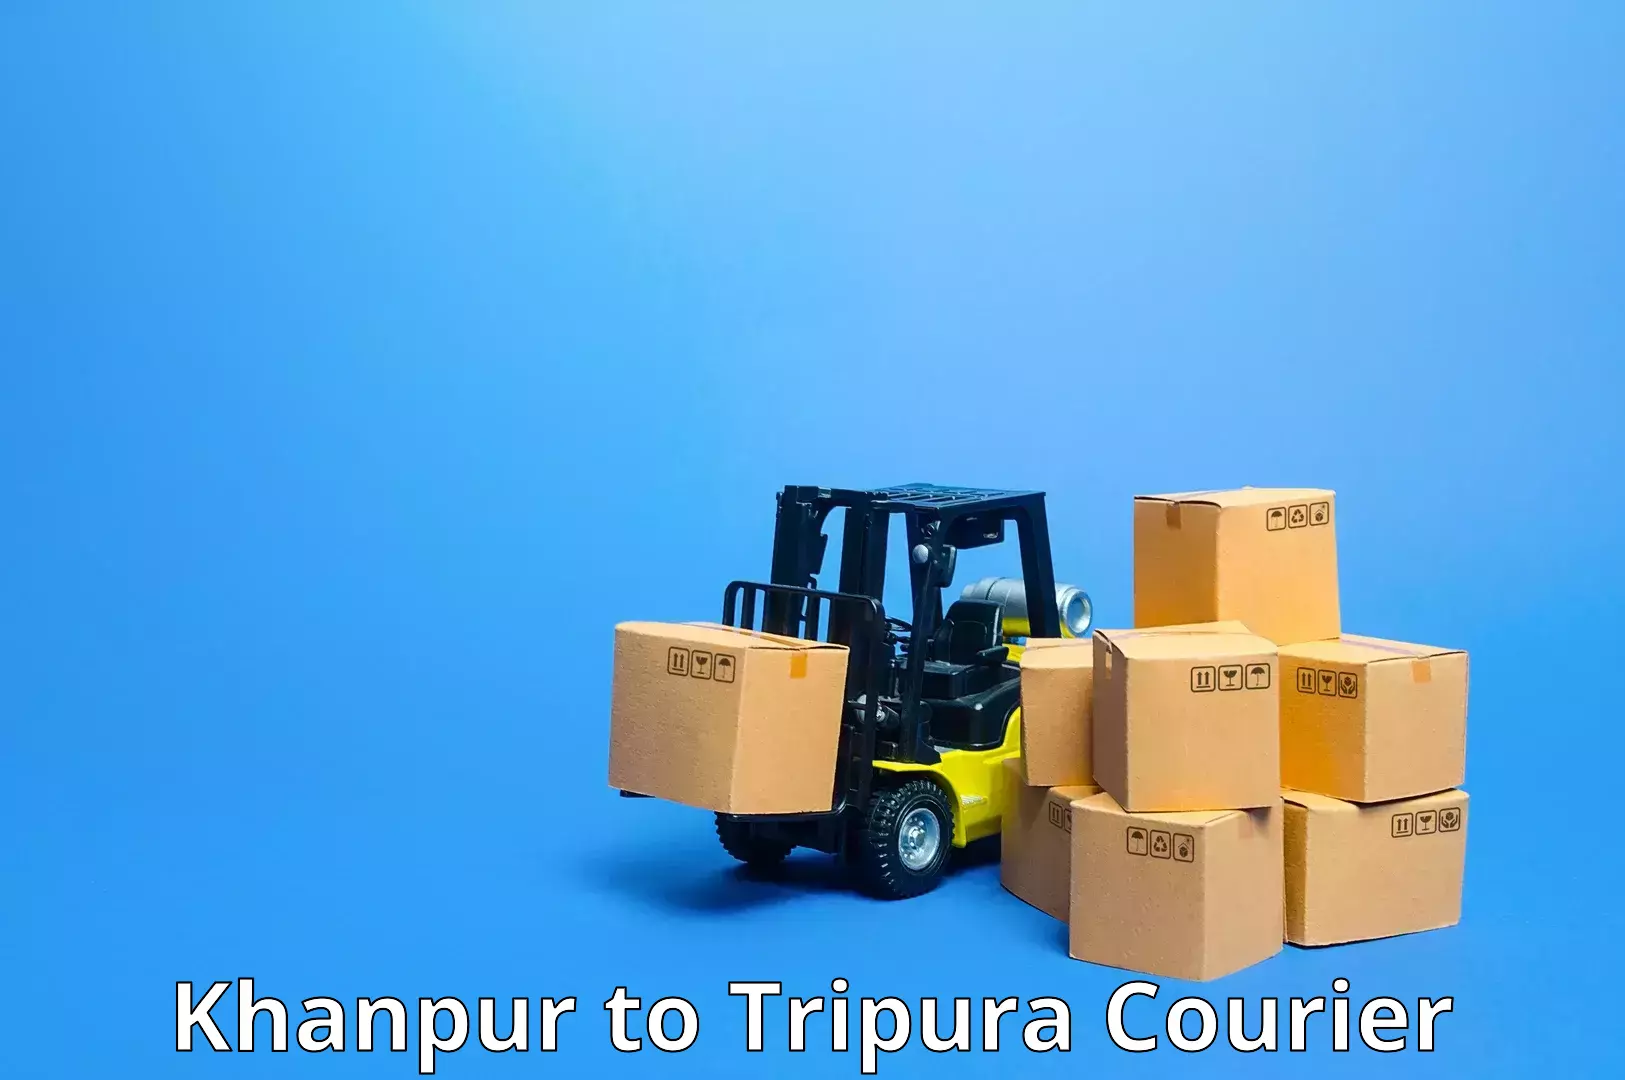 Efficient freight service Khanpur to Udaipur Tripura